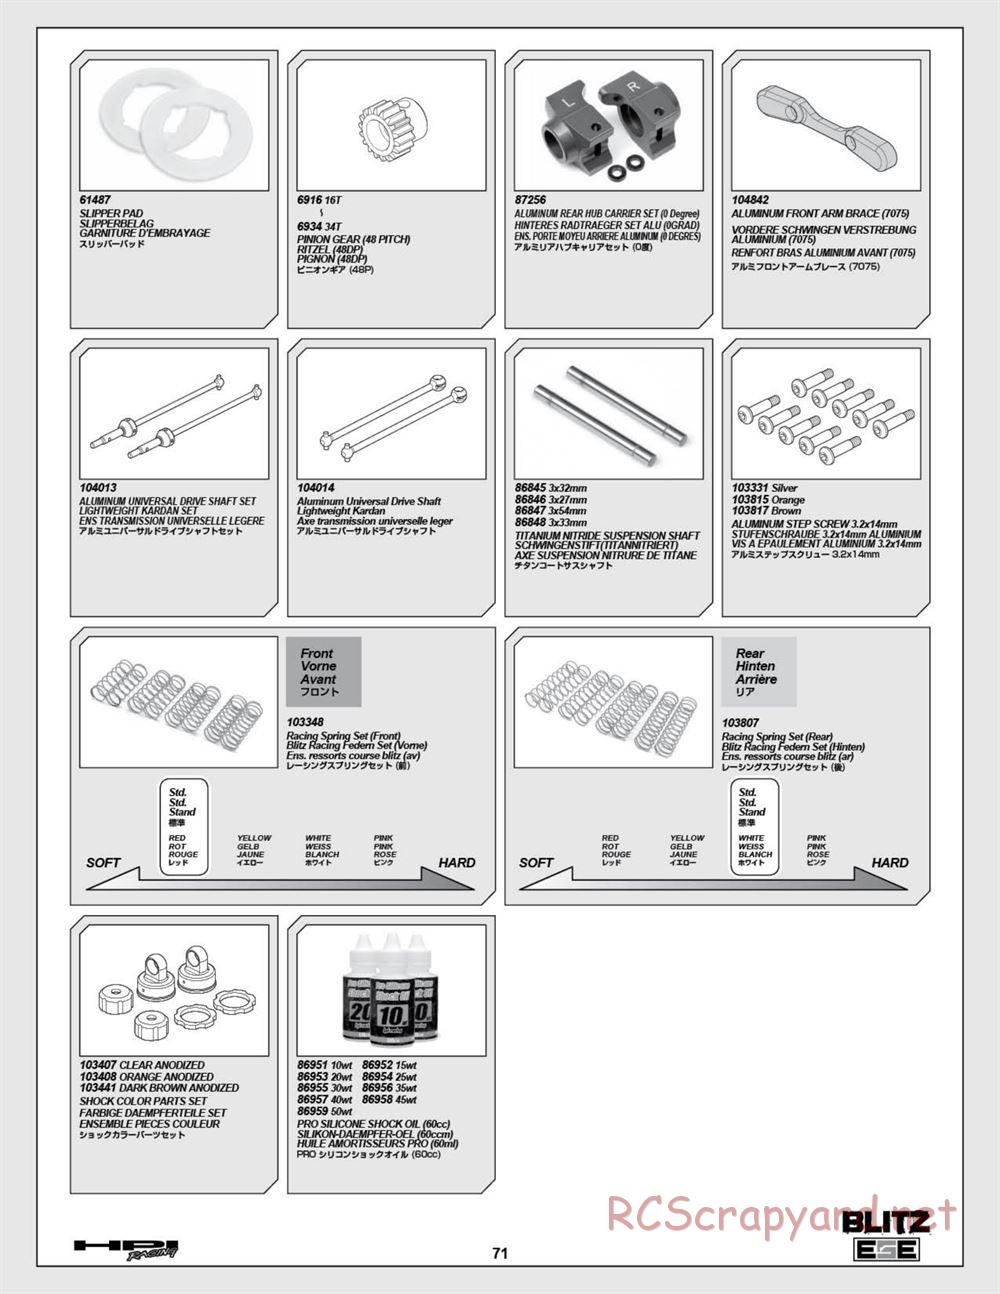 HPI - Blitz ESE - Exploded View - Page 71